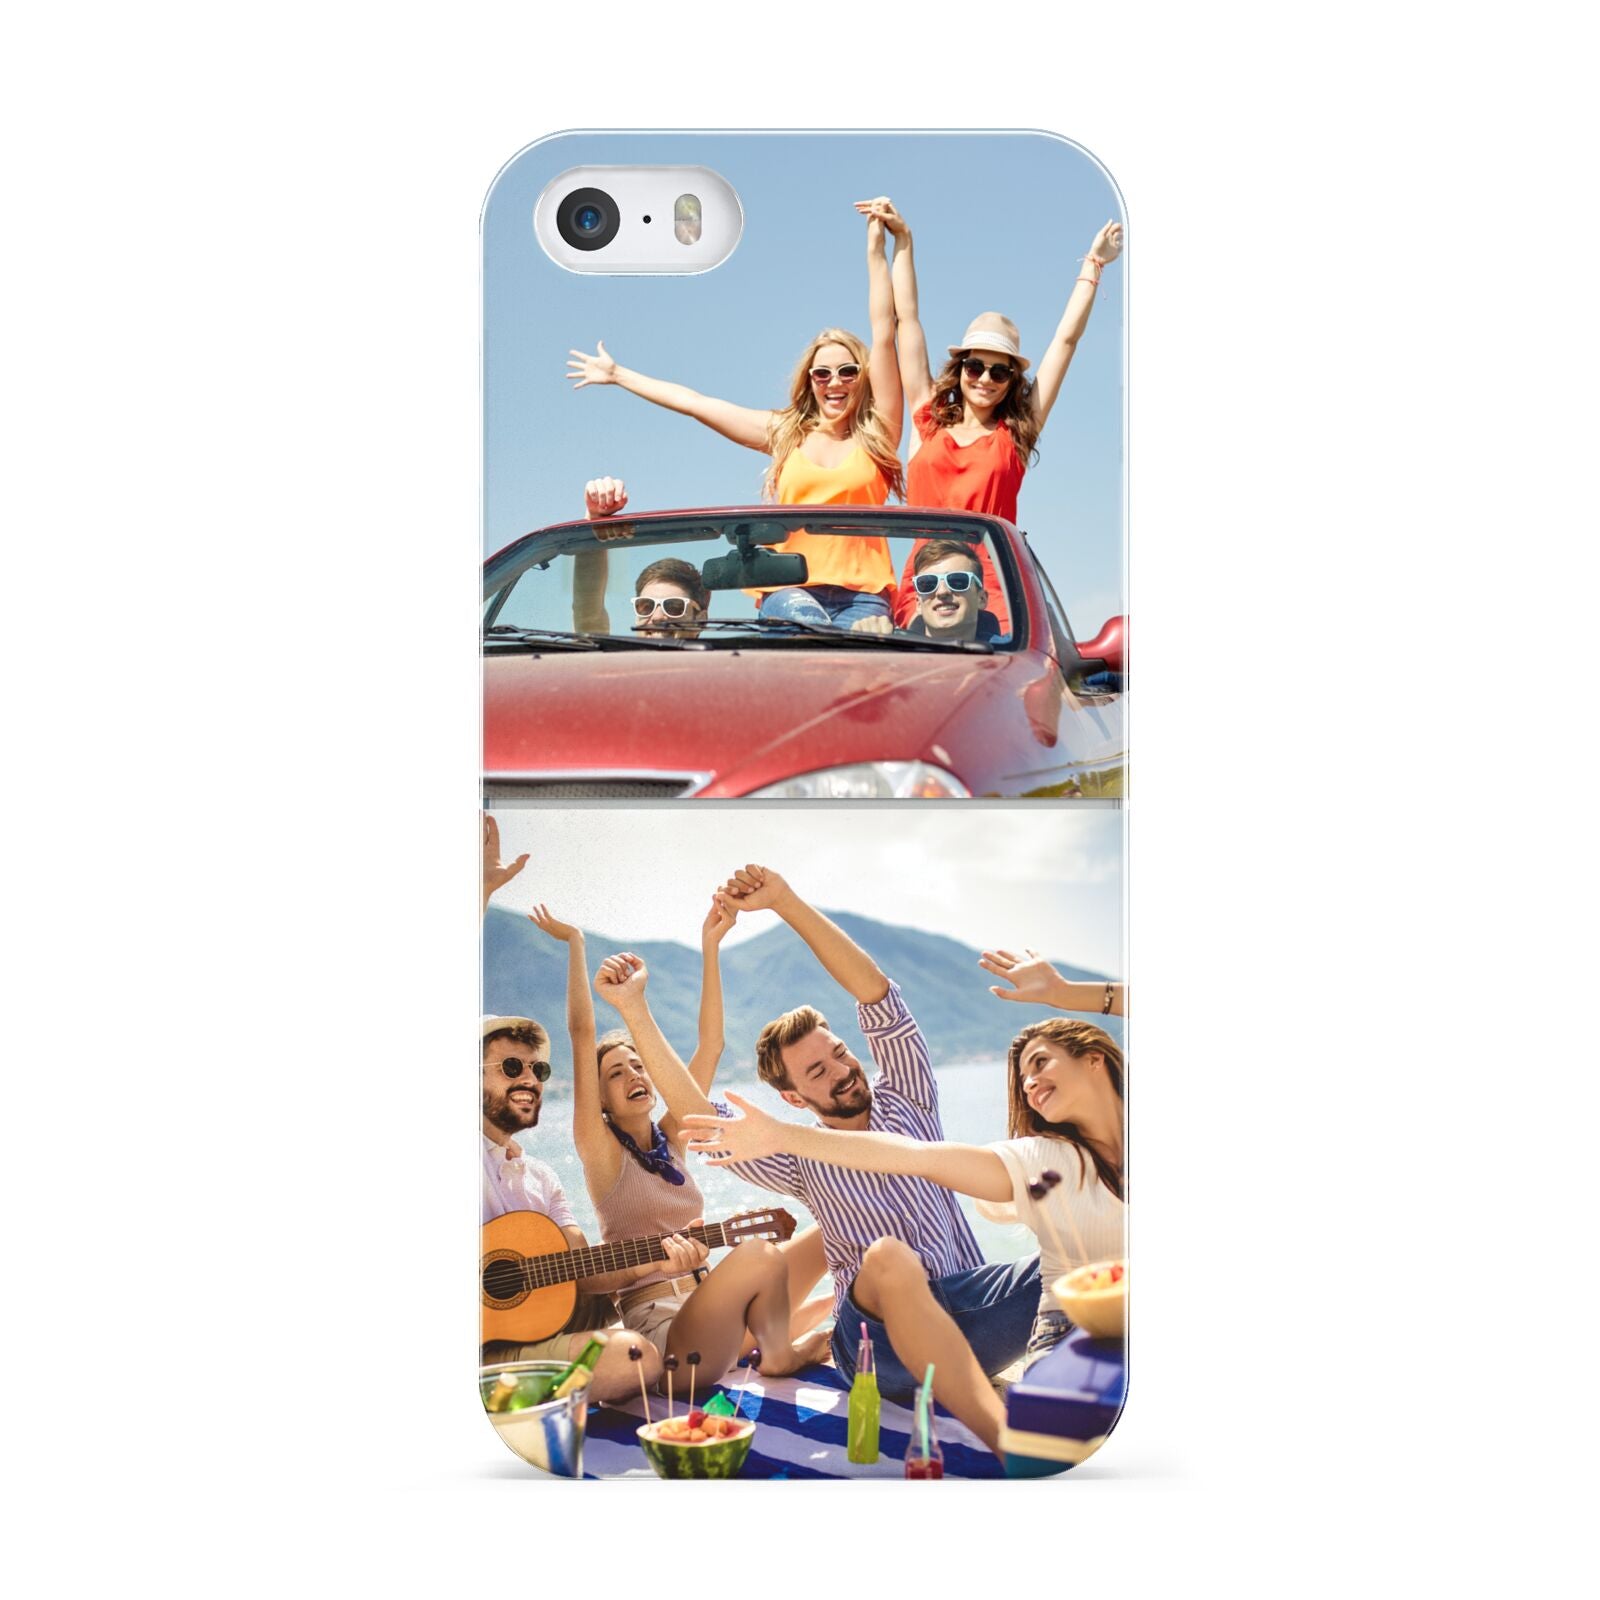 Two Photo Apple iPhone 5 Case